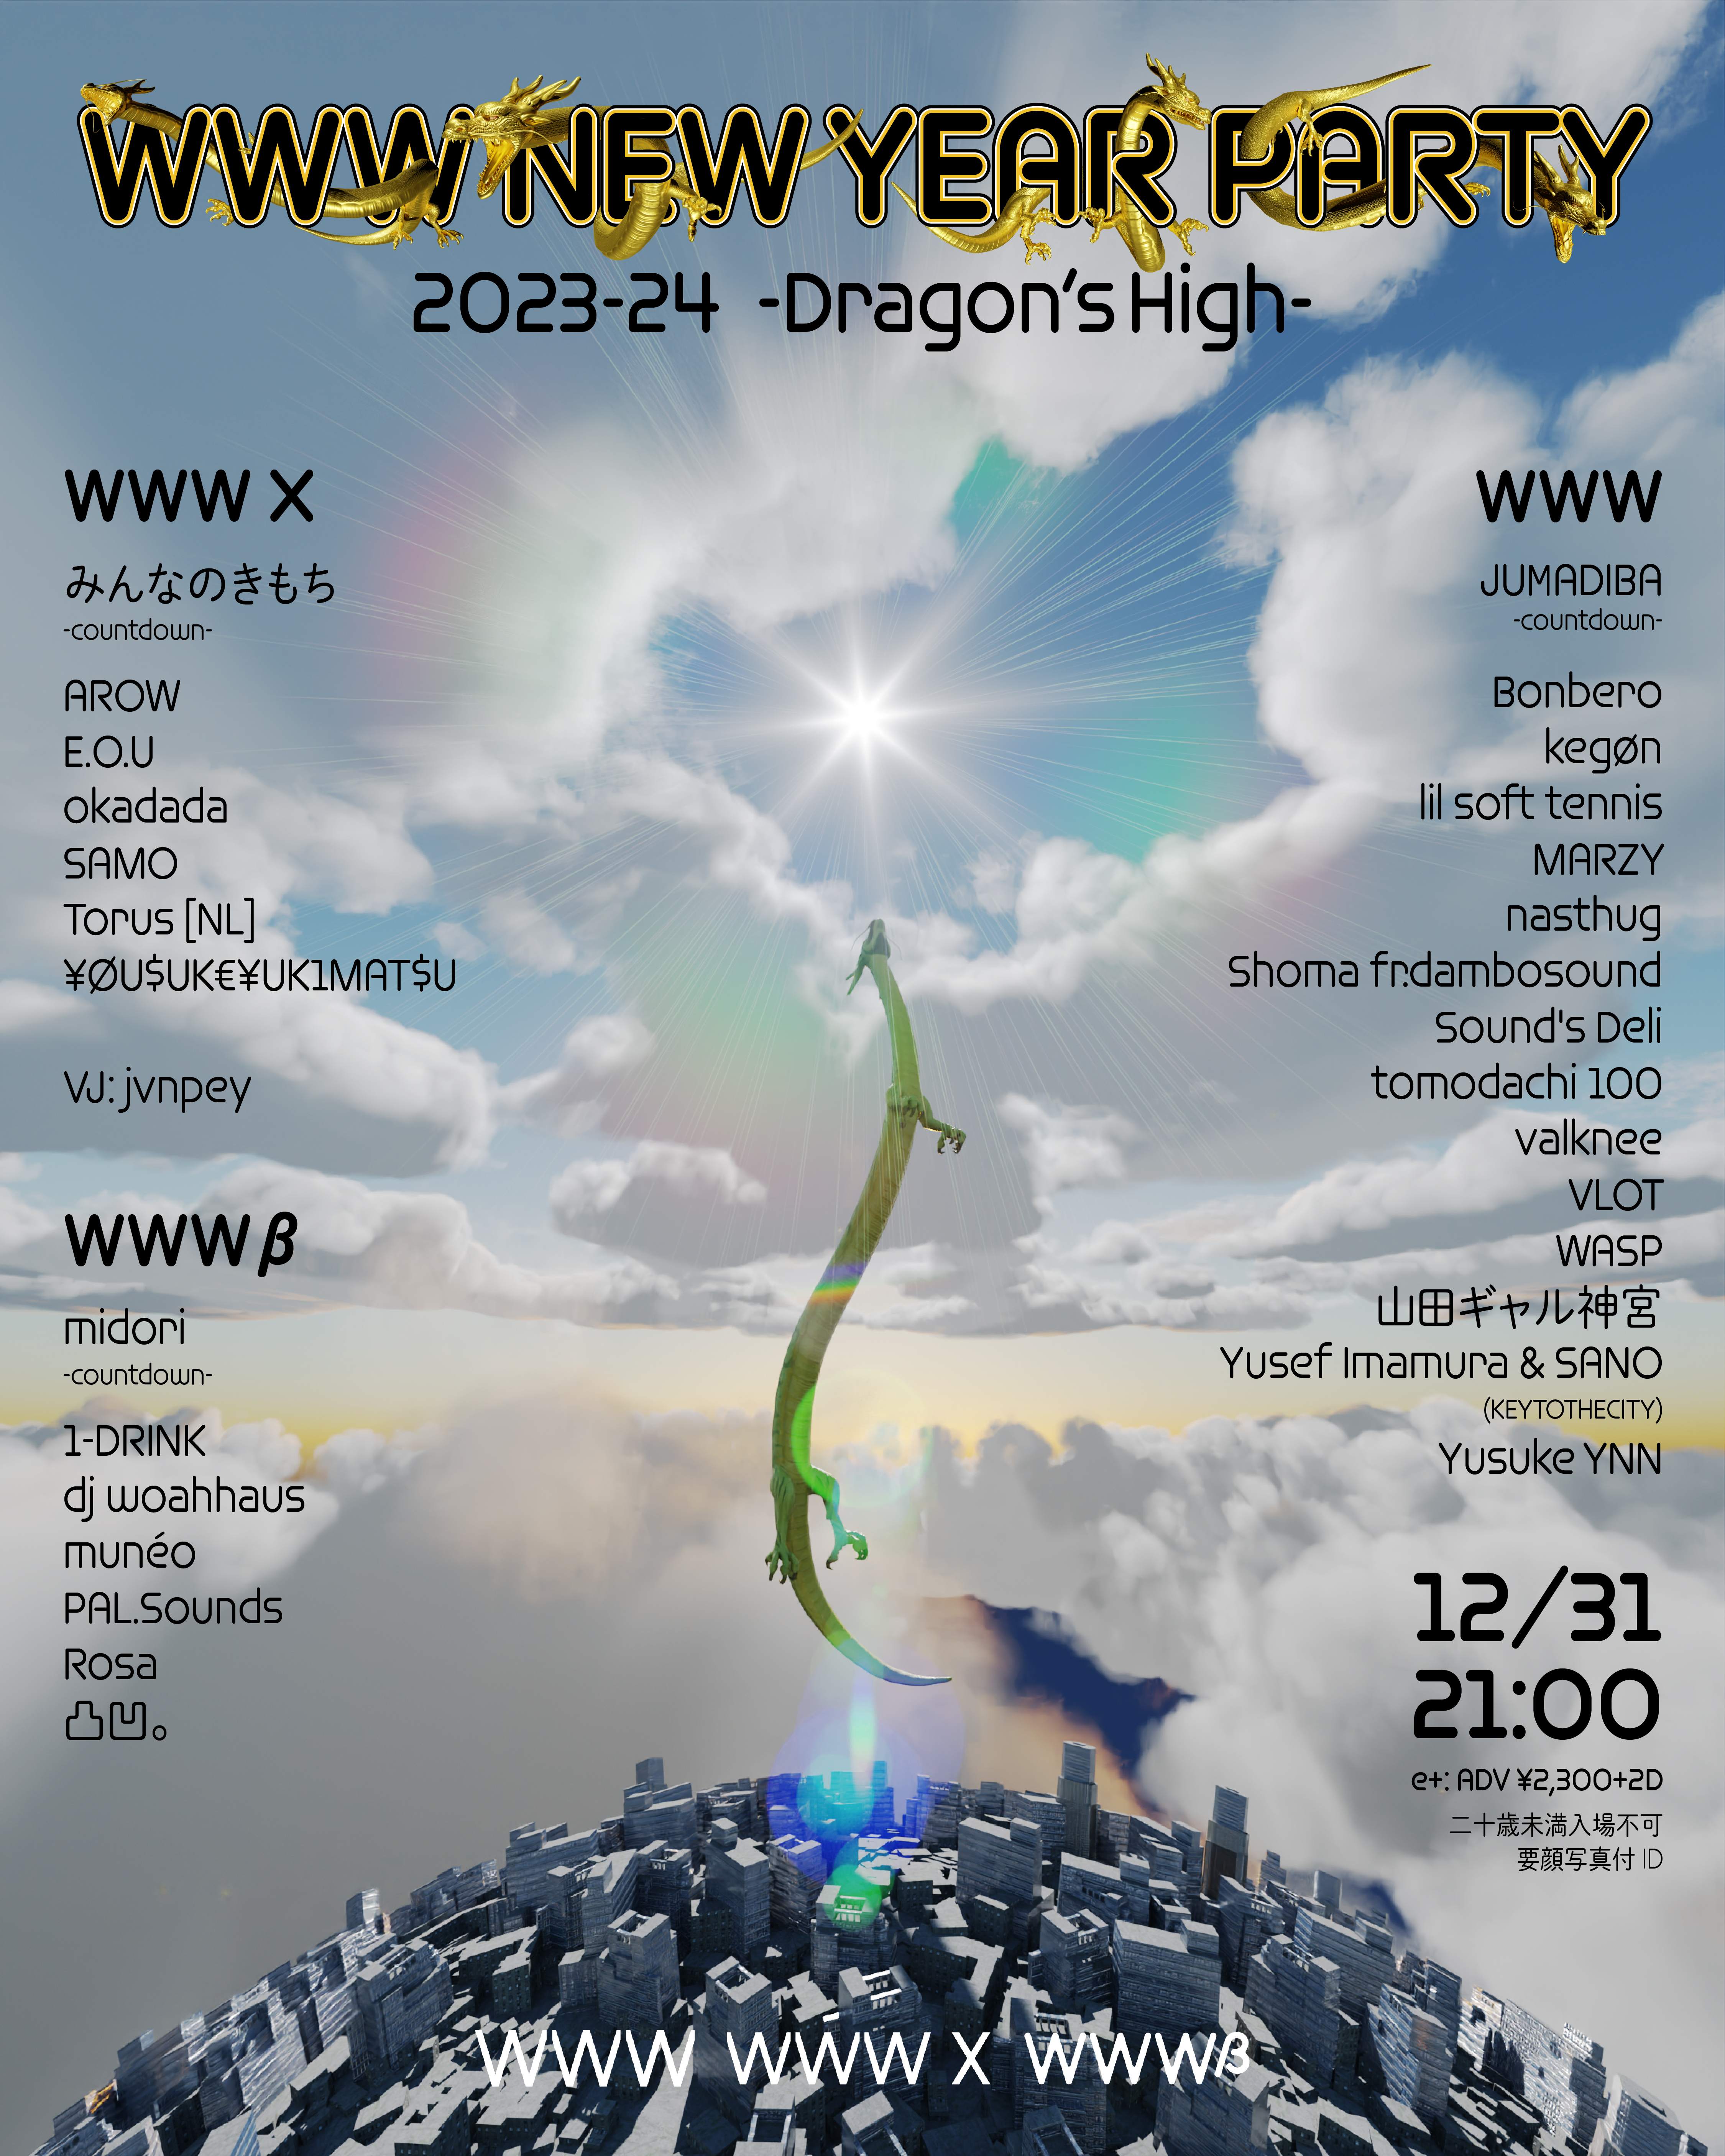 WWW NEW YEAR PARTY 2023-24 -Dragon's High- - フライヤー表